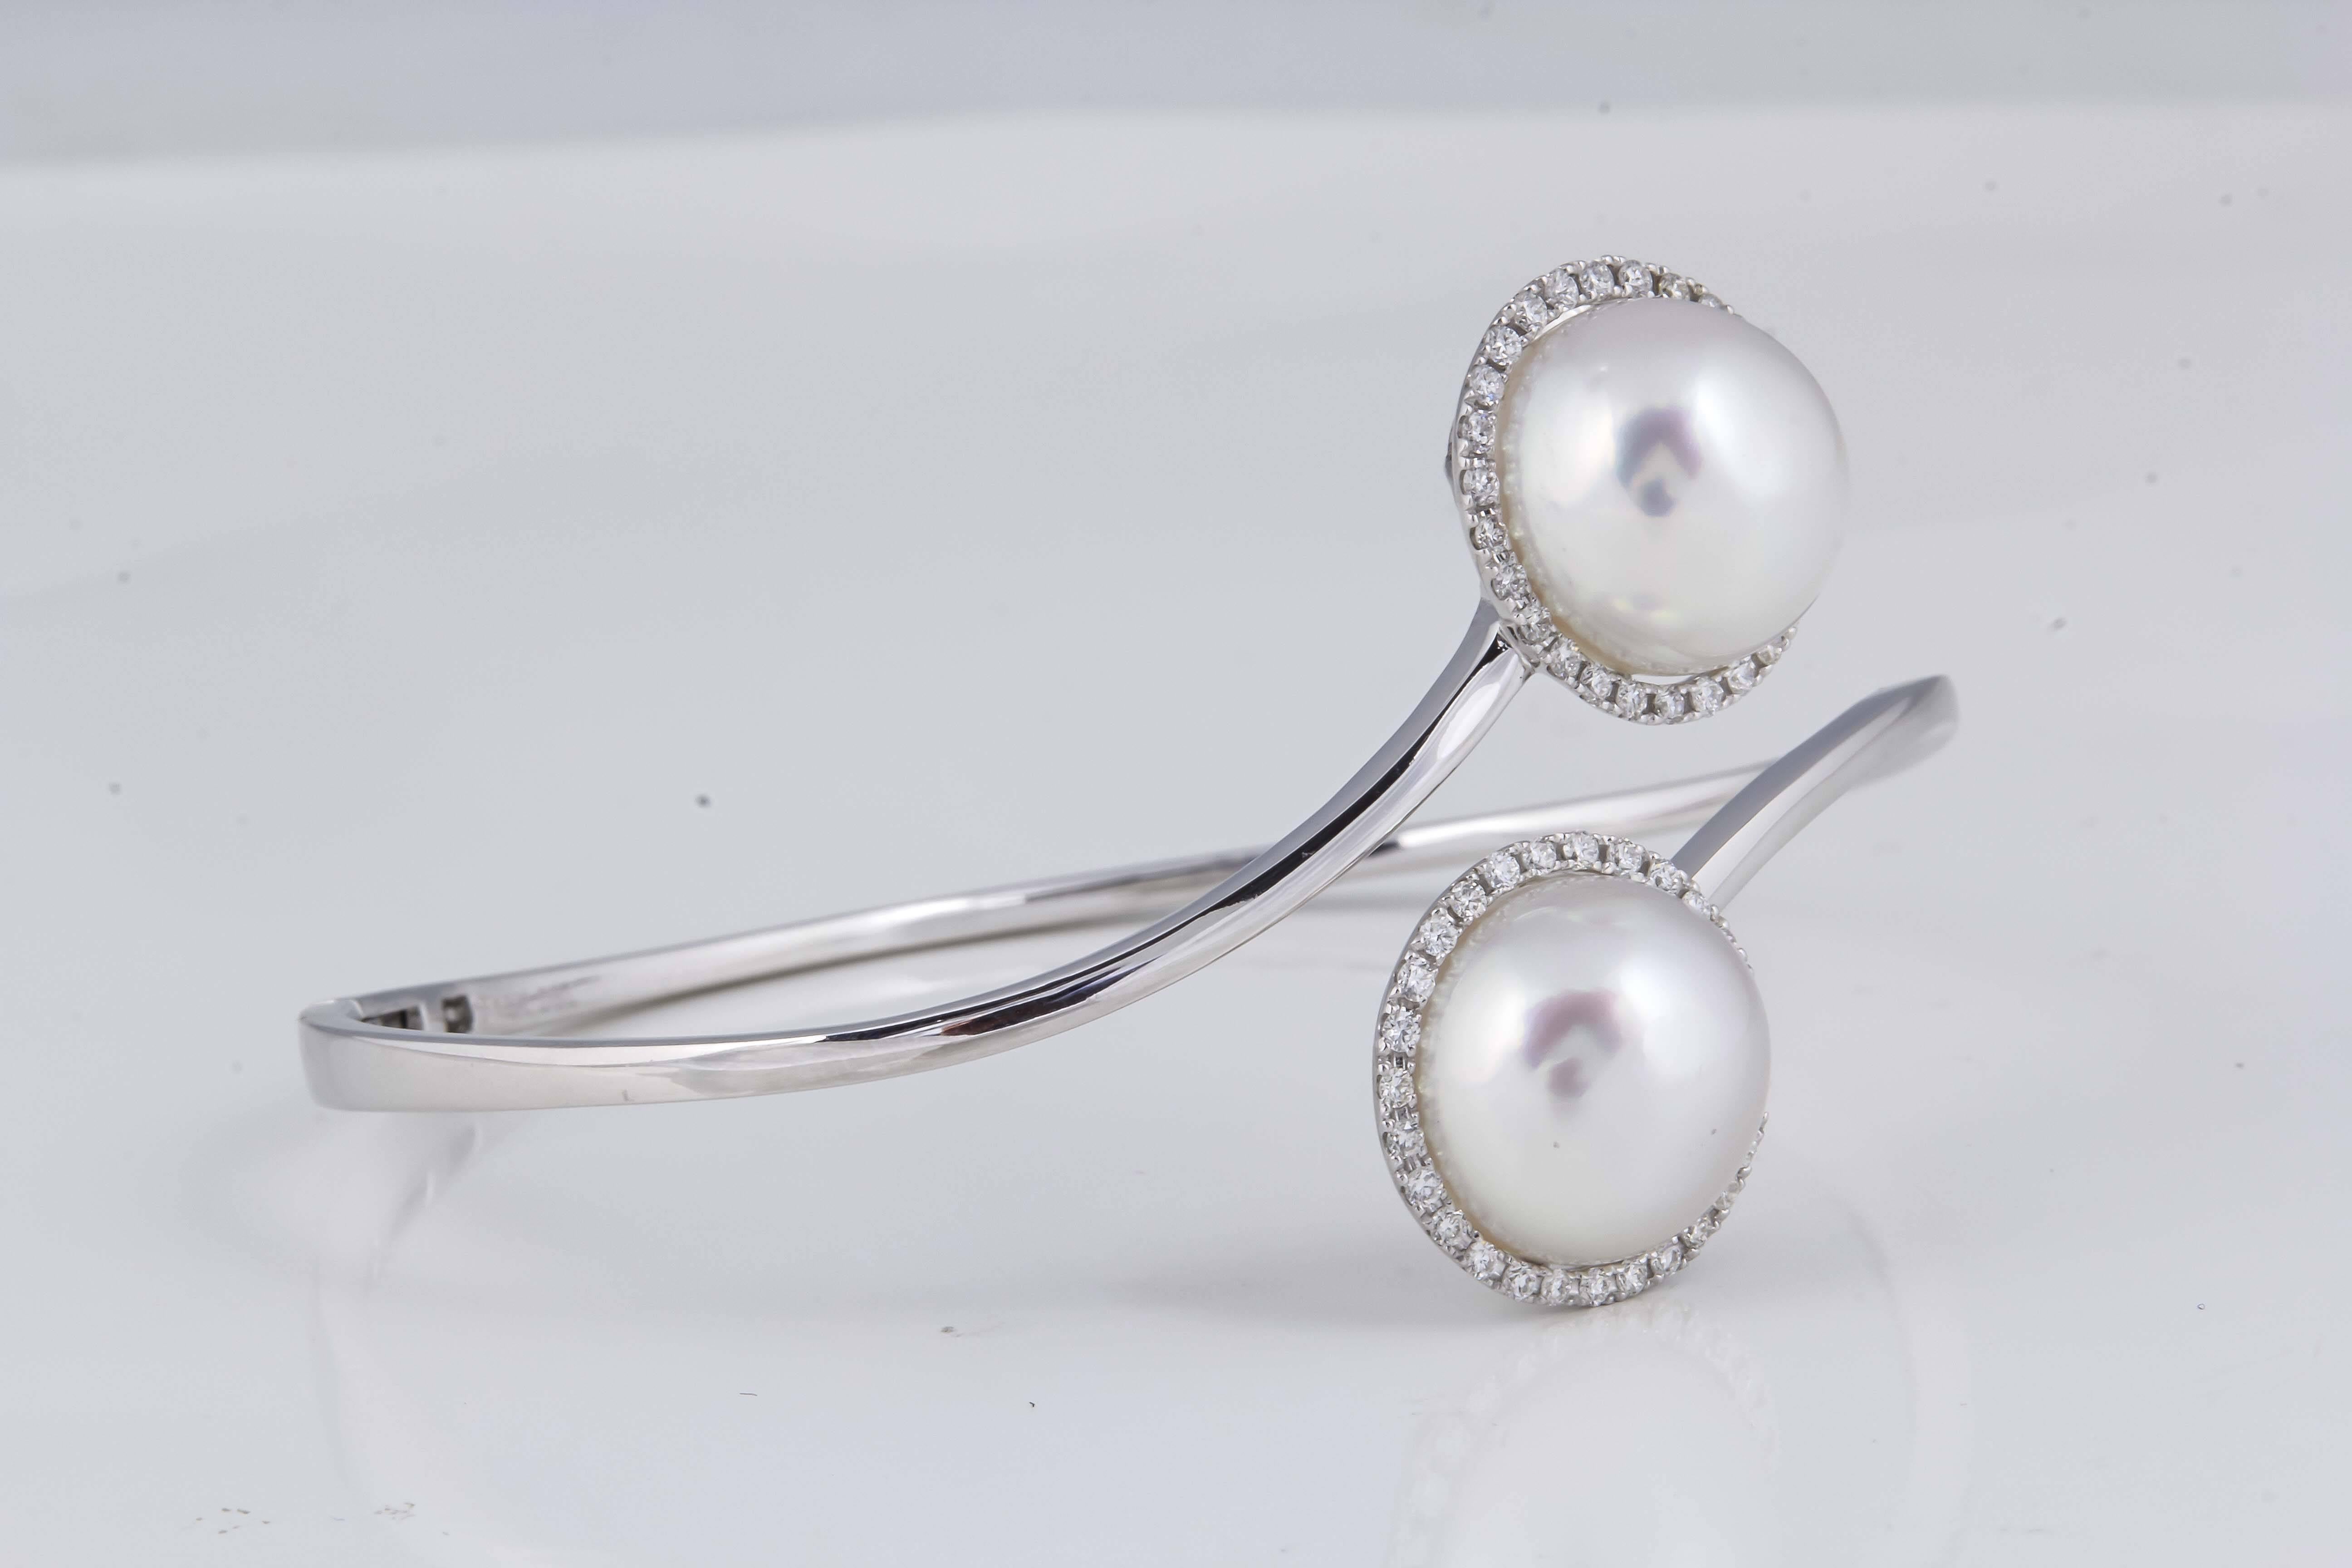 18K White Gold bypass bangle bracelet featuring two South Sea Pearls each measuring 12-13 mm surrounded by a diamond halo weighing 0.51 carats. 
Color G-H
Clarity SI

Pearls can be changed to Pink, Tahitian or Golden upon request. Price subject to